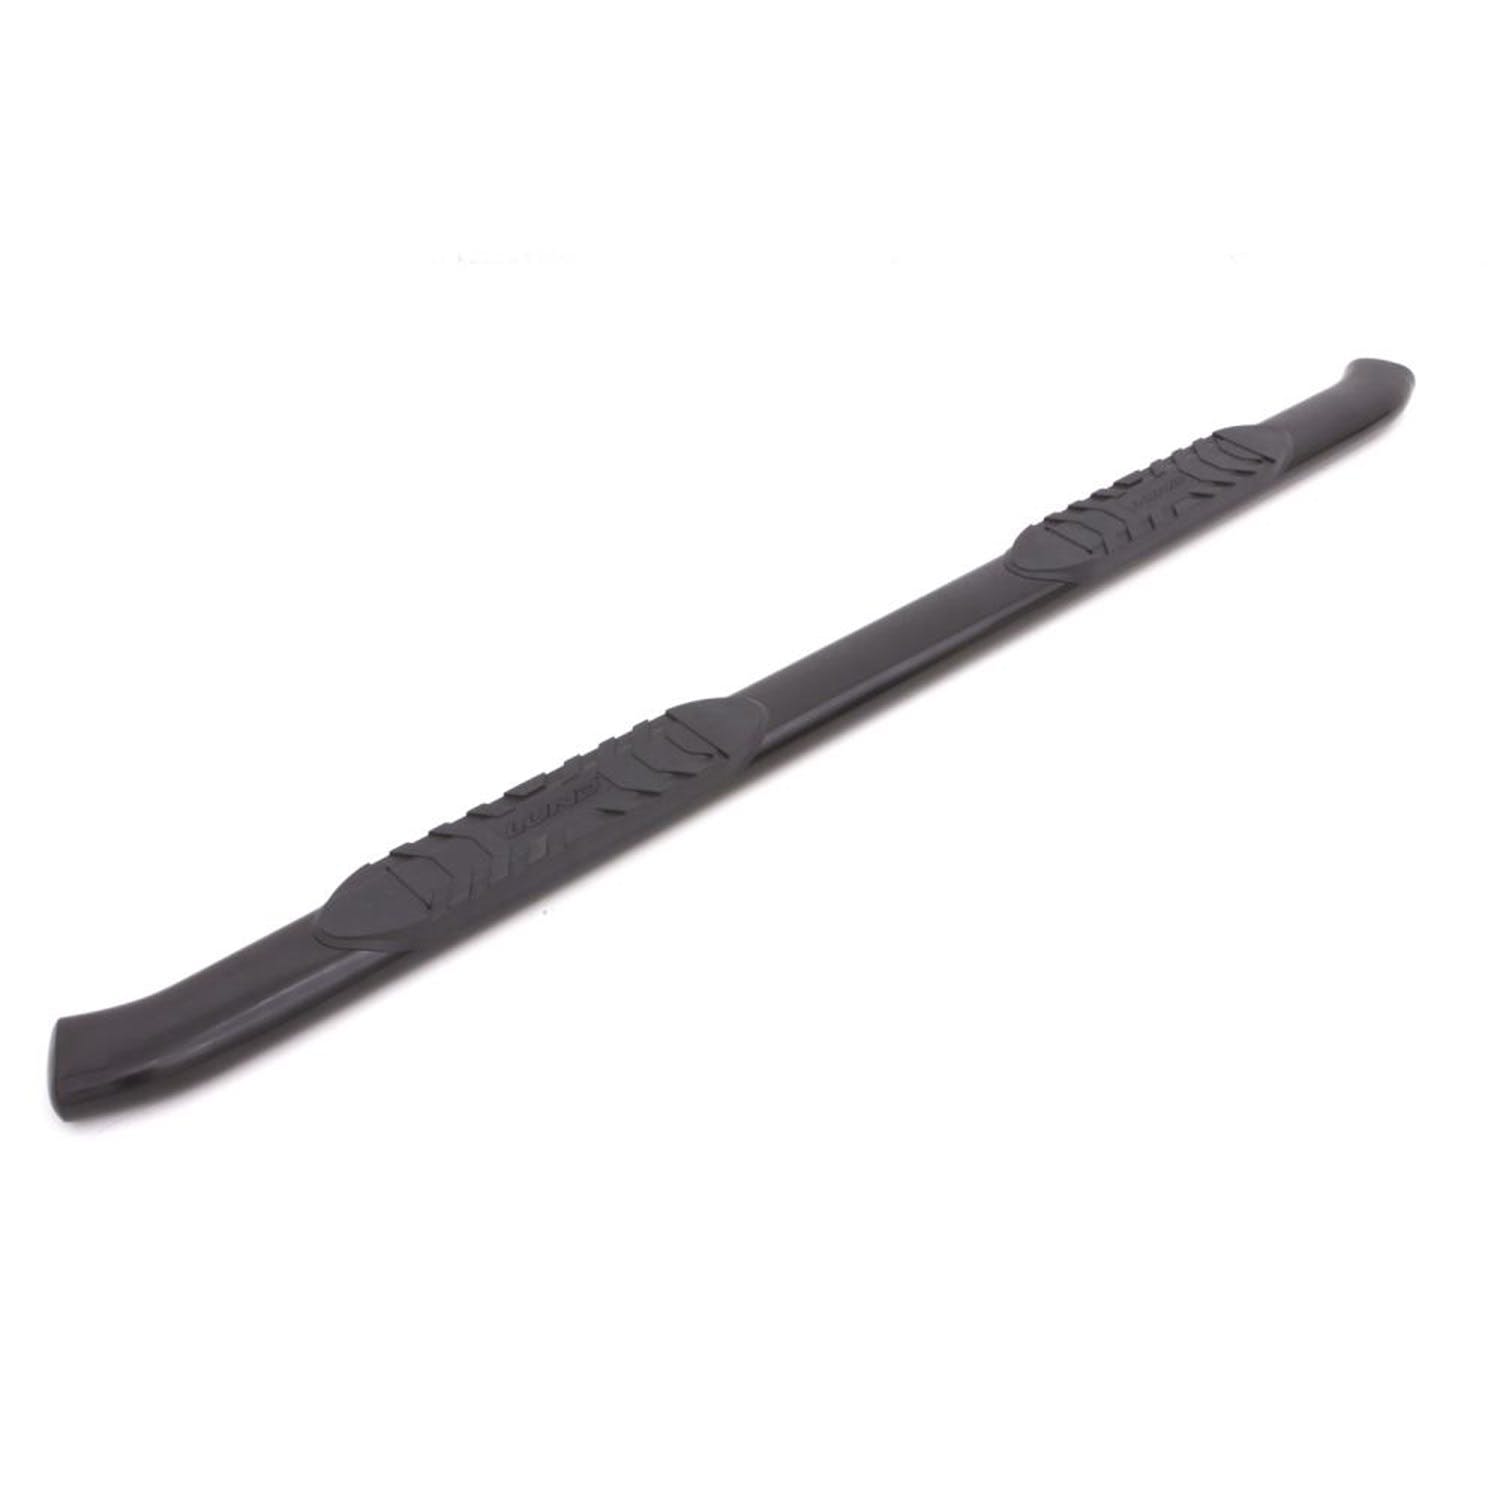 LUND 24289007 5 Inch Oval Curved Nerf Bar - Black LUND -5 inch CURVED OVAL BLACK SS